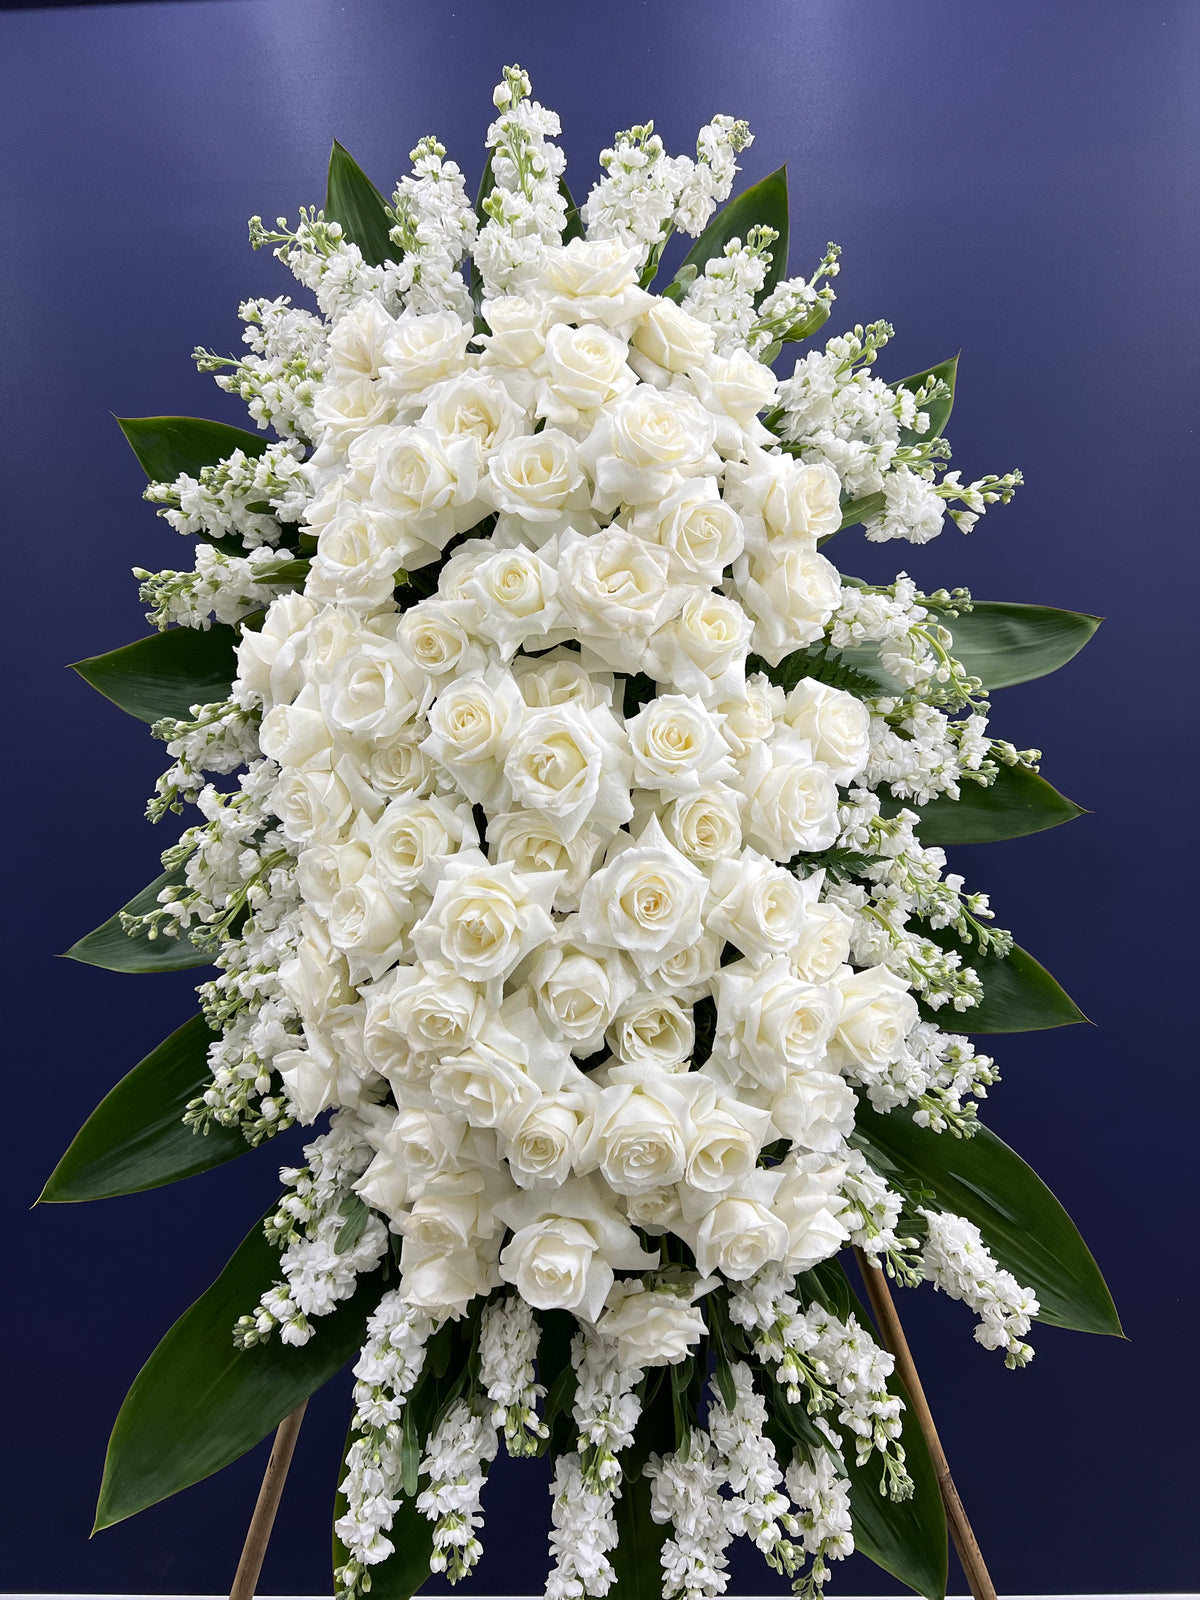 "Heavenly Rose Standing Spray: A Luxurious Tribute of Roses, Stocks, and Hydrangeas for Sympathy and Support. Elegant Flower Delivery by Yonge Florist to GTA Funeral Homes, Churches, and Chapels."